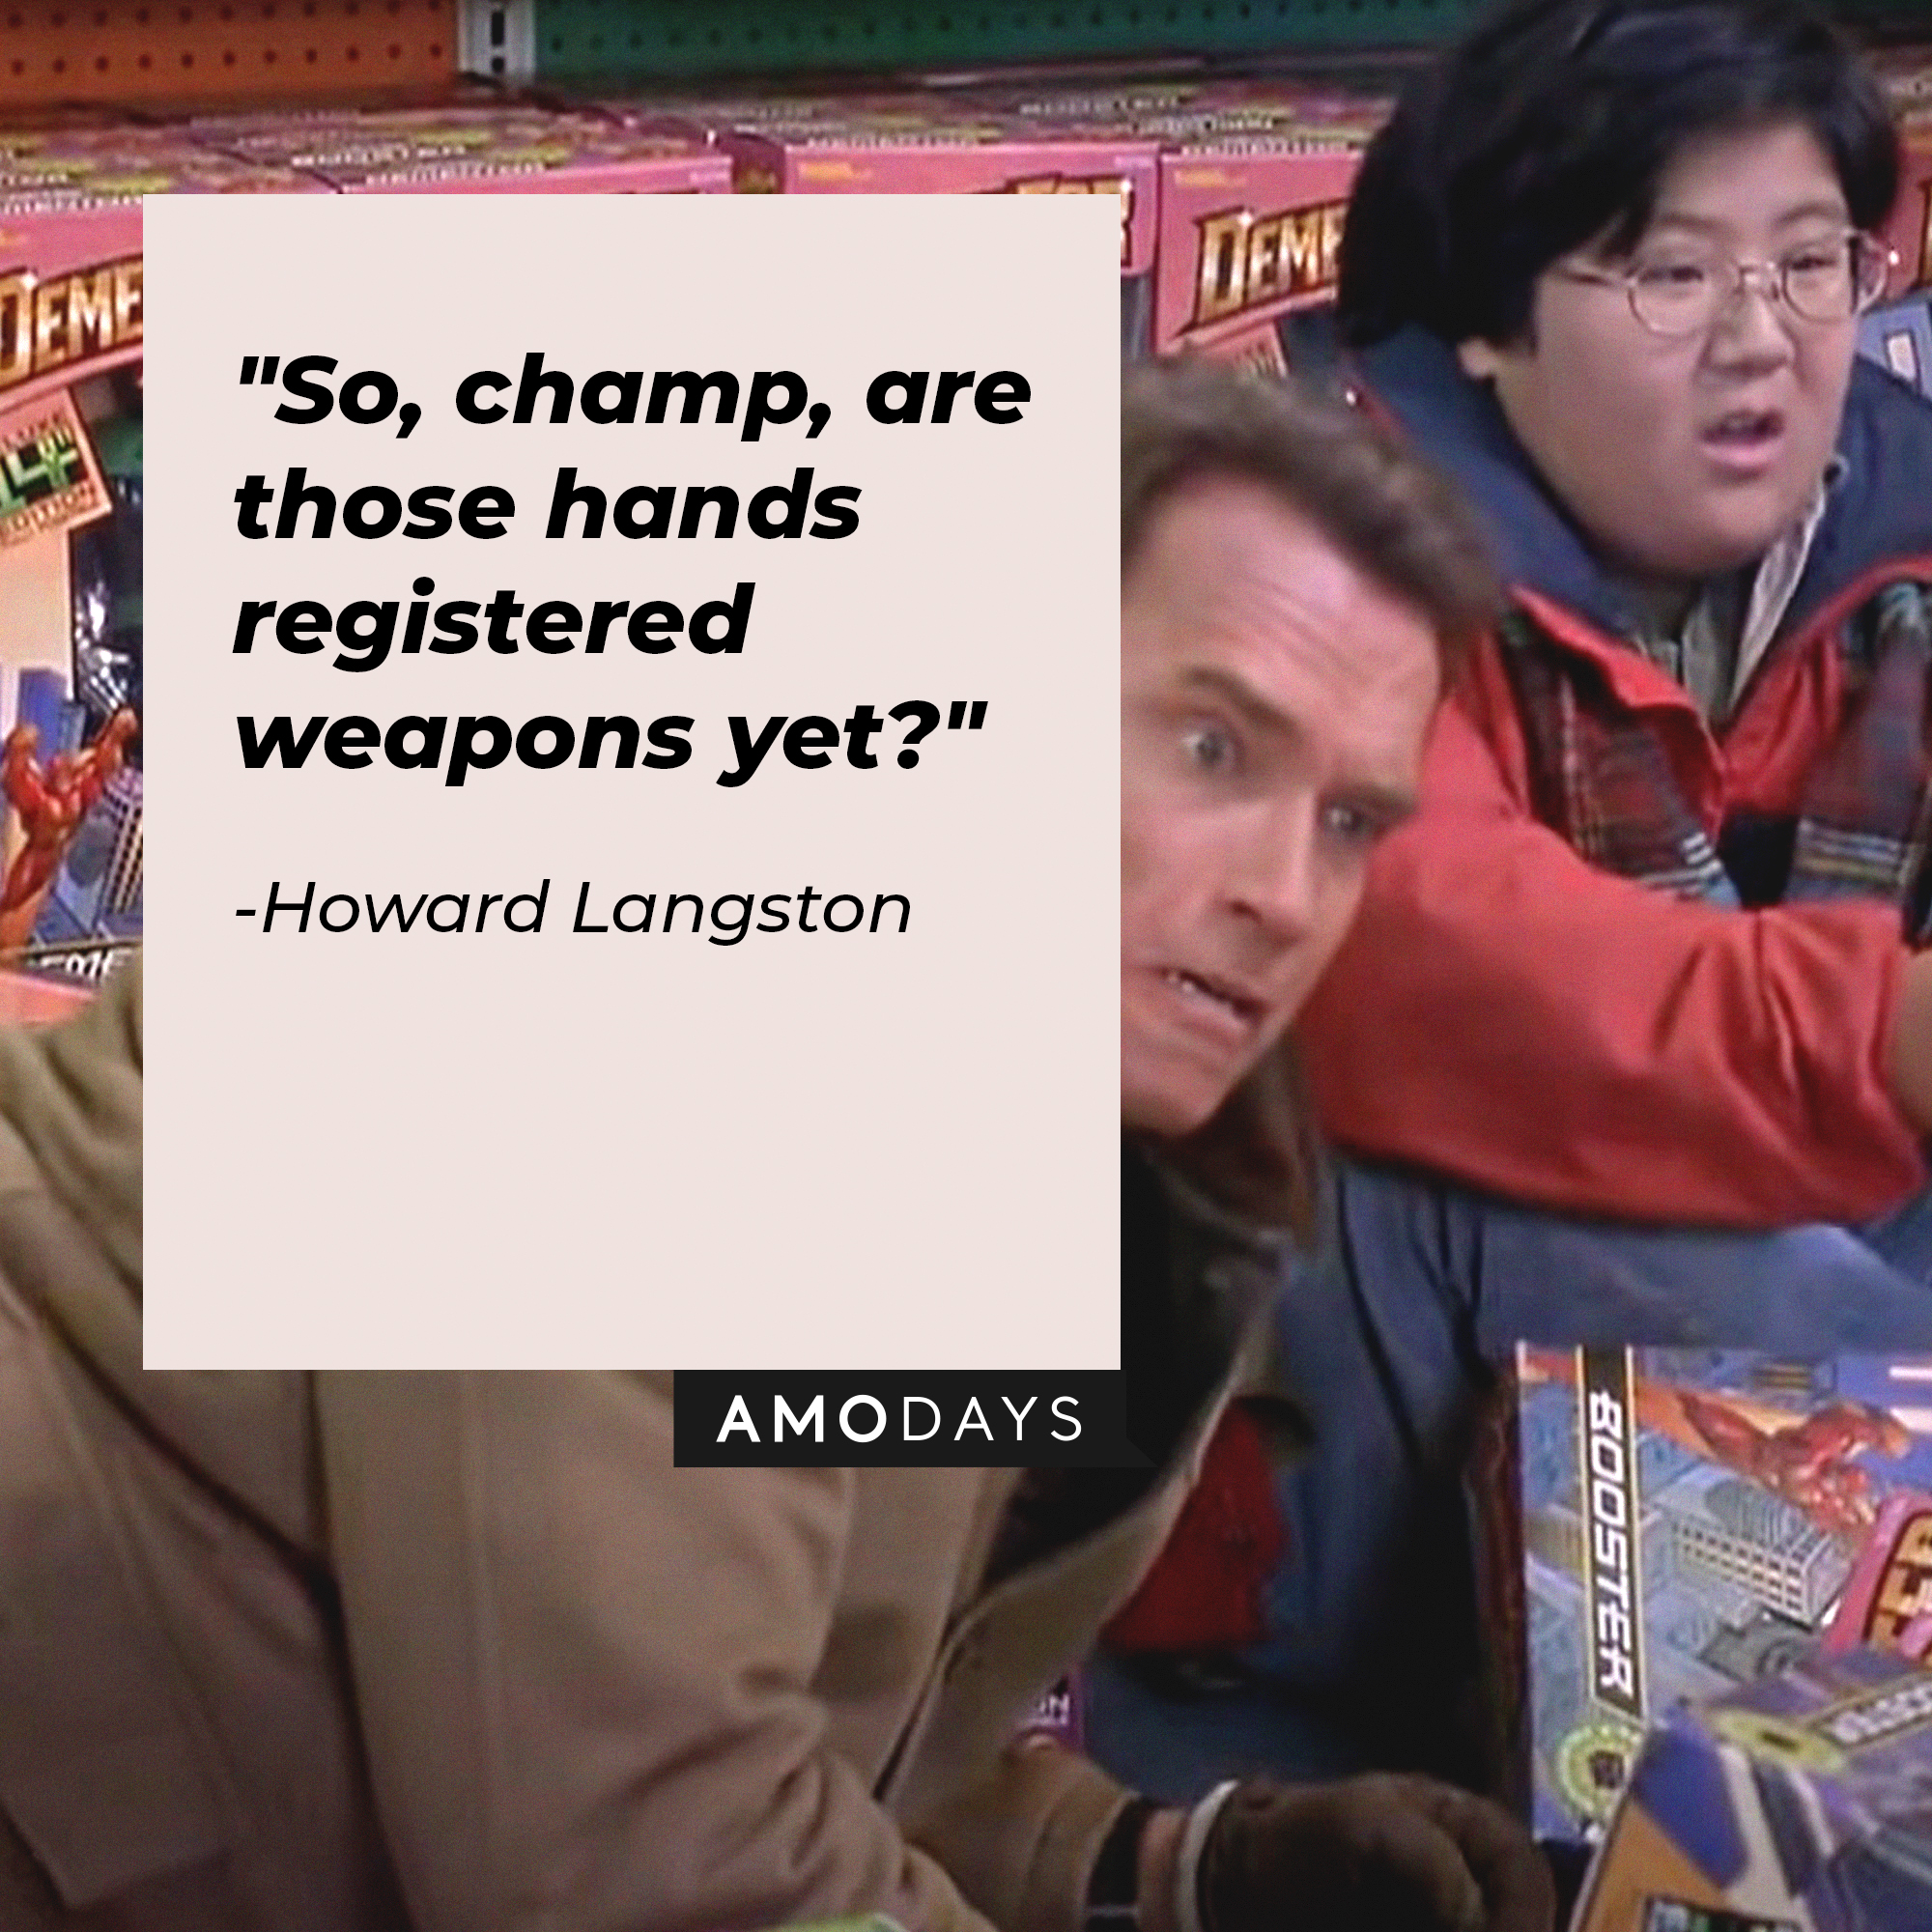 Howard Langston's quote: "So, champ, are those hands registered weapons yet?" | Source: Facebook.com/JingleAllTheWayMovies